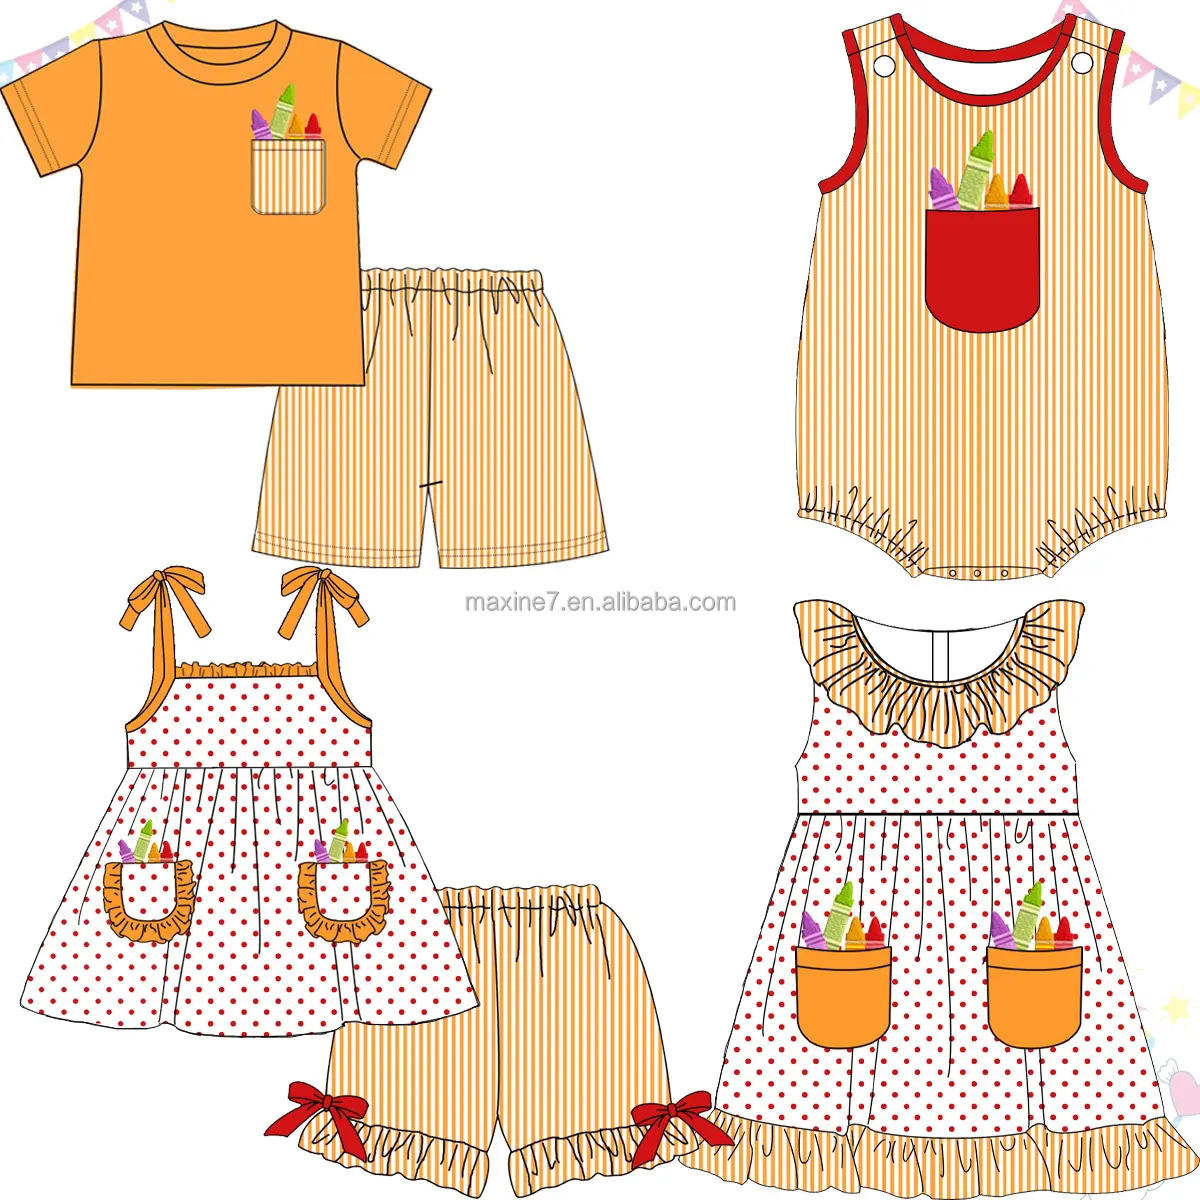 Customization knitting kids clothing summer ruffle pockets girl outfits crayon embroidery dots printed two piece sets